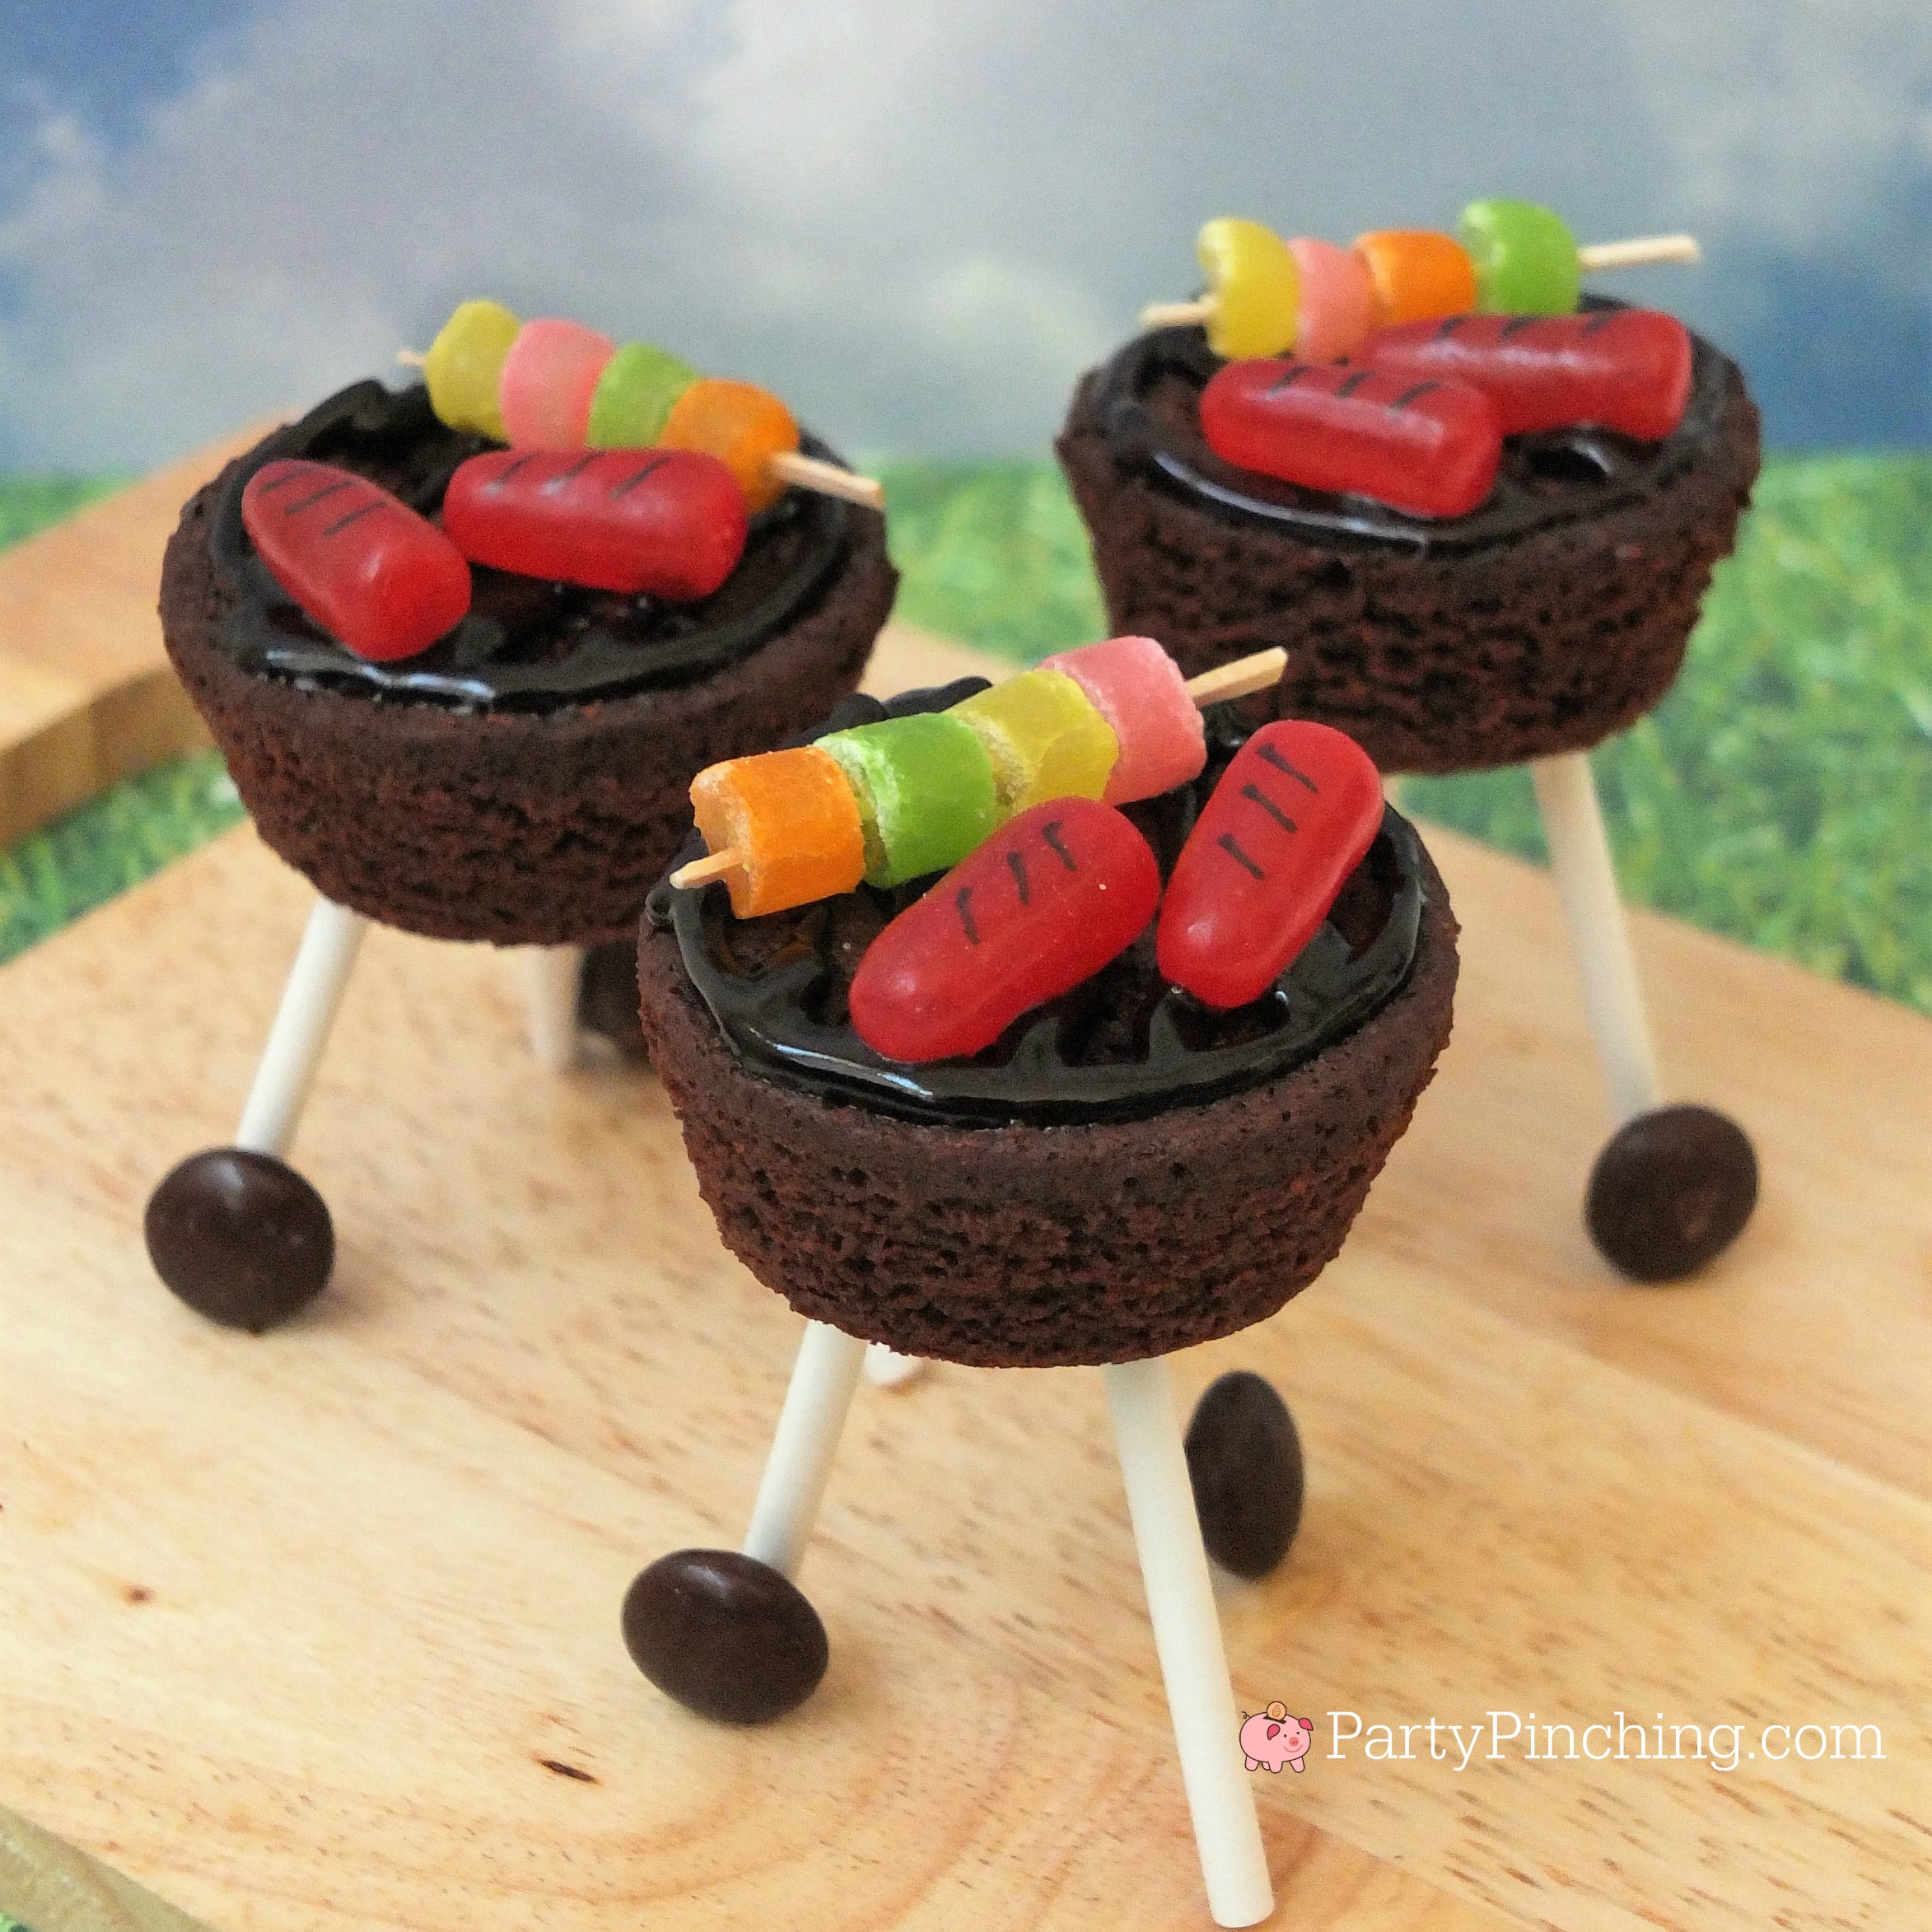 brownie outdoor grill, brownie grill bites, BBQ brownie grill with candy hot dog and skewers, candy skewer, candy grilled hot dogs, charcoal grill dessert brownies, sweet treat picnic BBQ brownies with wheels, kettle BBQ brownies